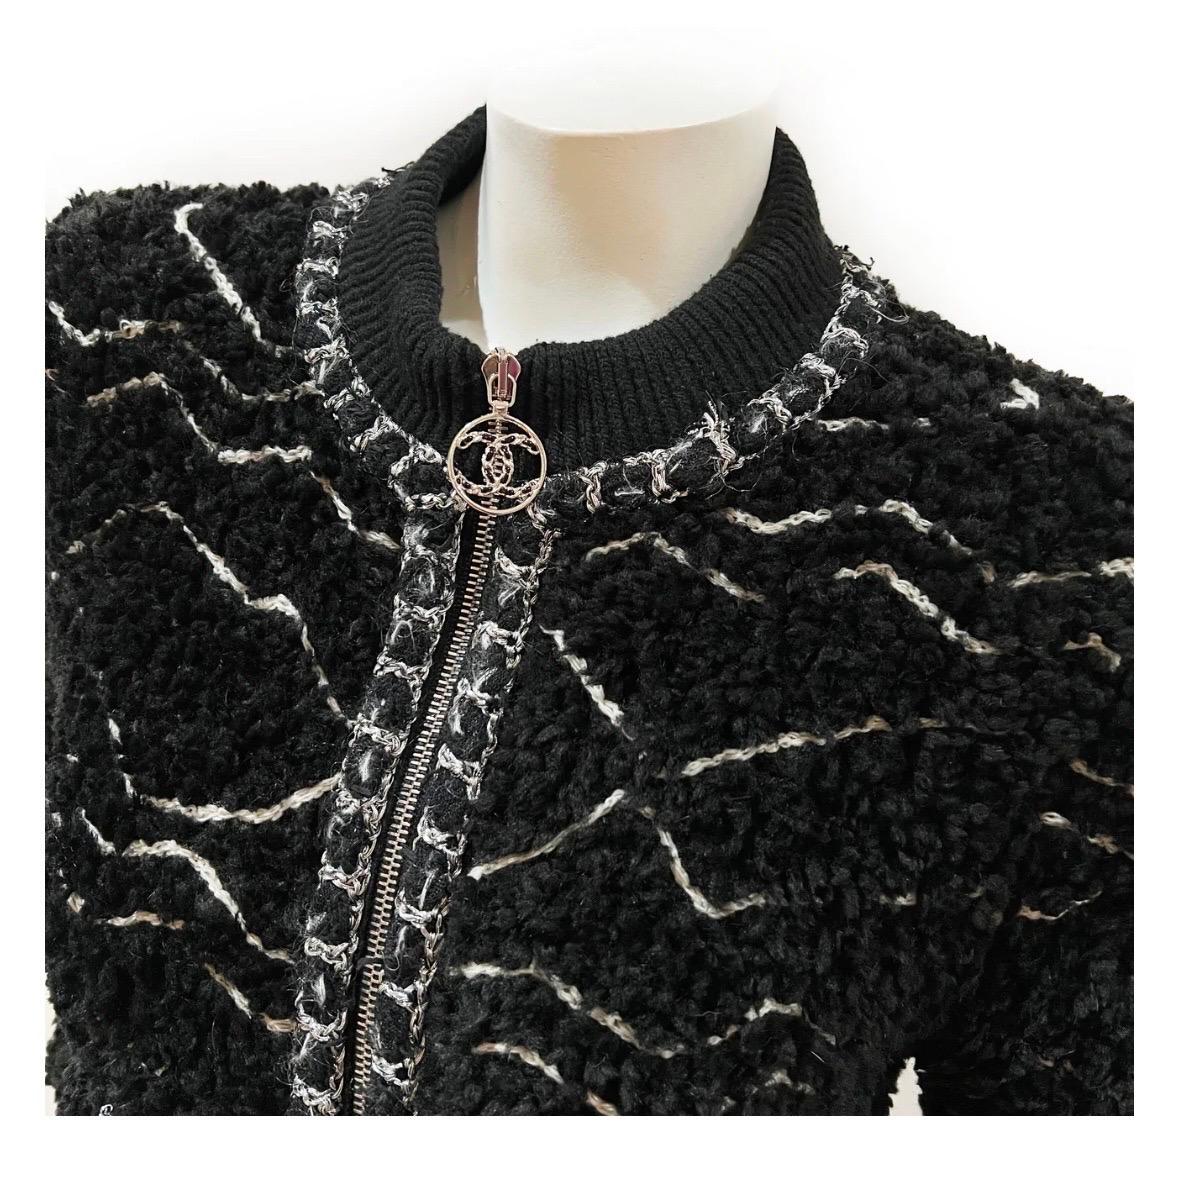 Black Fuzzy Alpaca Zip Designer Jacket by Chanel
Fall / Winter 2019
Made in Italy
Black/white
Silver and black tweed trim
Fuzzy Alpaca texture detail throughout jacket
Ribbed collar and bottom detail
Silvertone hardware
Front zip closure 
Dual open